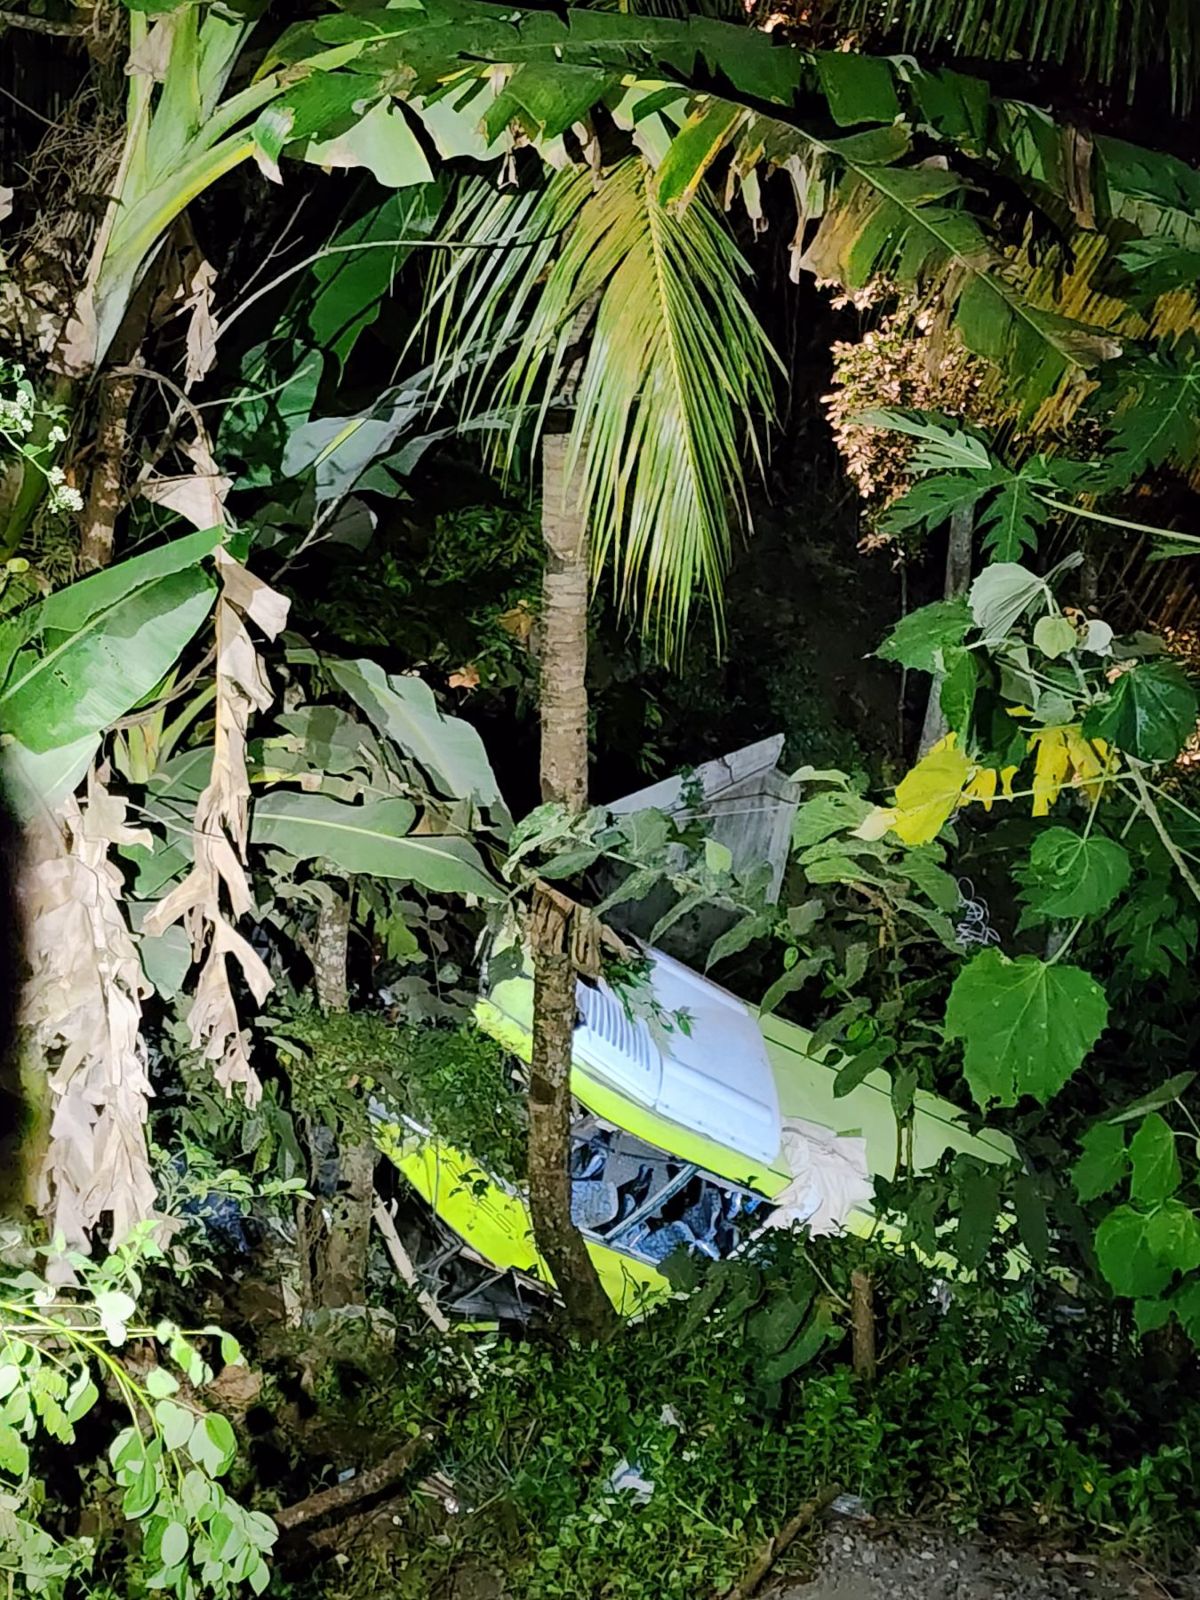 25 dead, 12 missing as bus falls into ravine in Antique